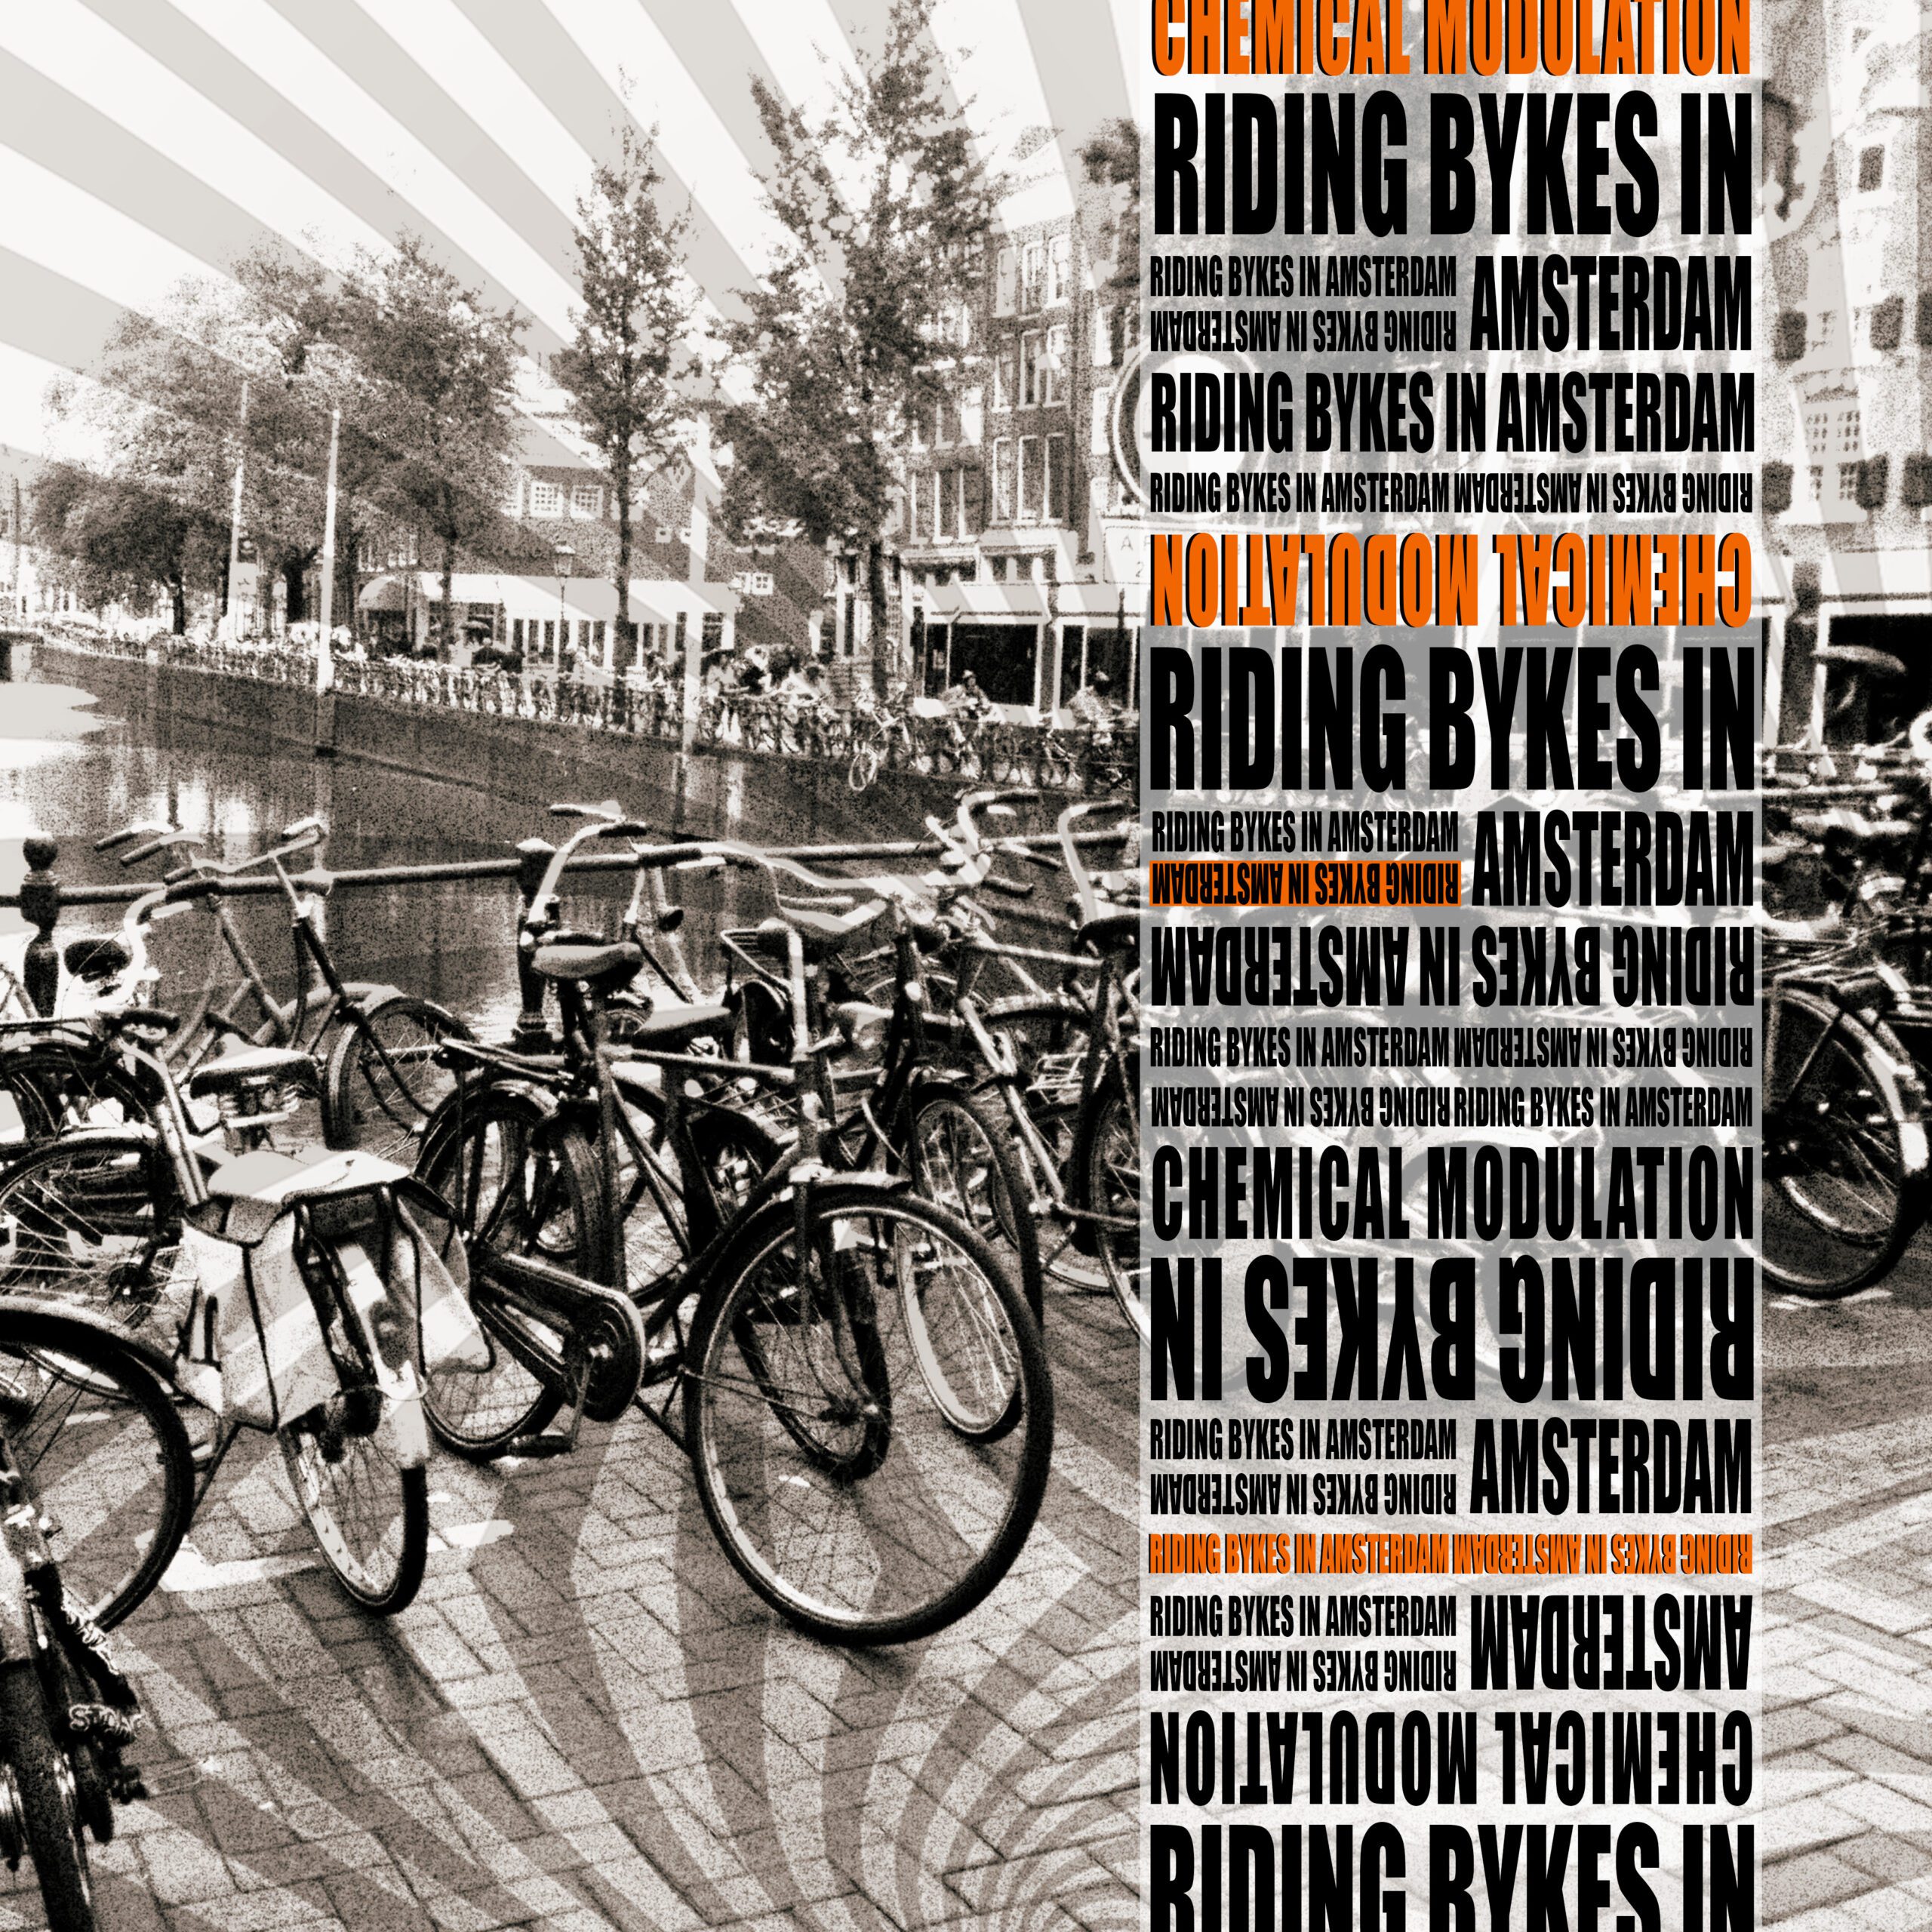 Riding Byke in Amsterdam (The Remix Collaboration) is out